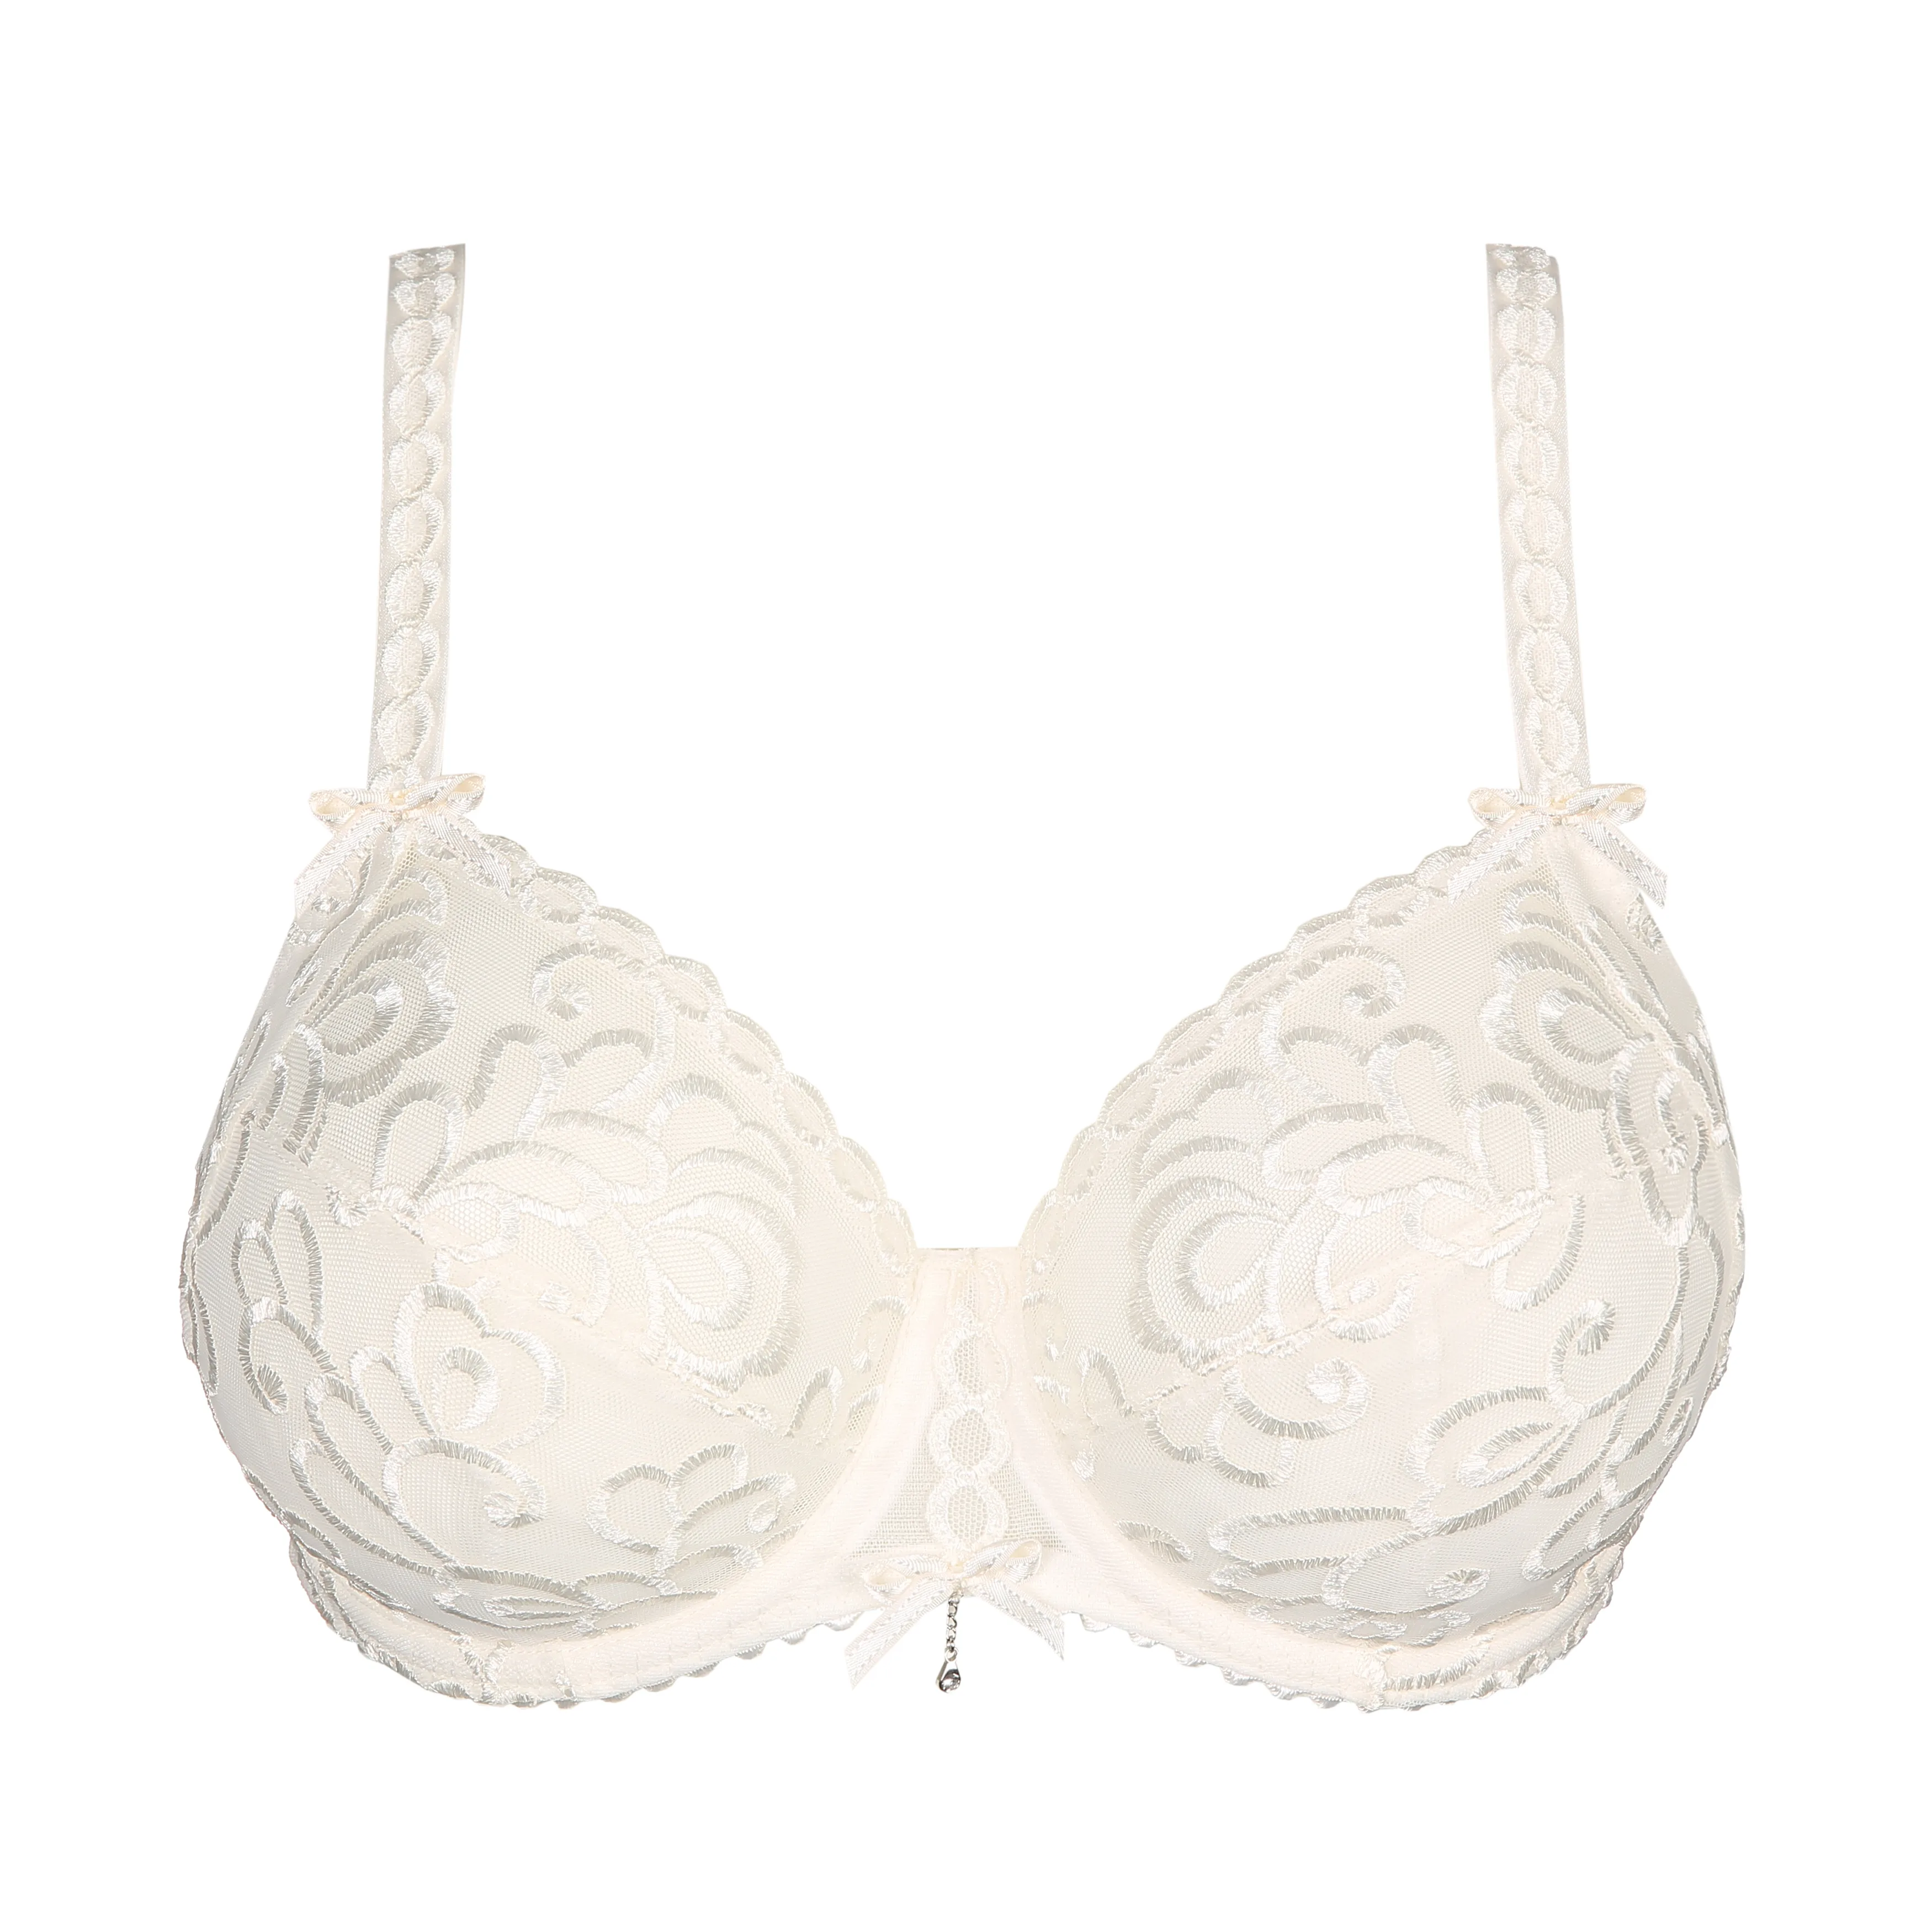 HANA LADIES CONTRAST TRIM UNDERWIRED FULL CUP BRA NATURAL D CUP